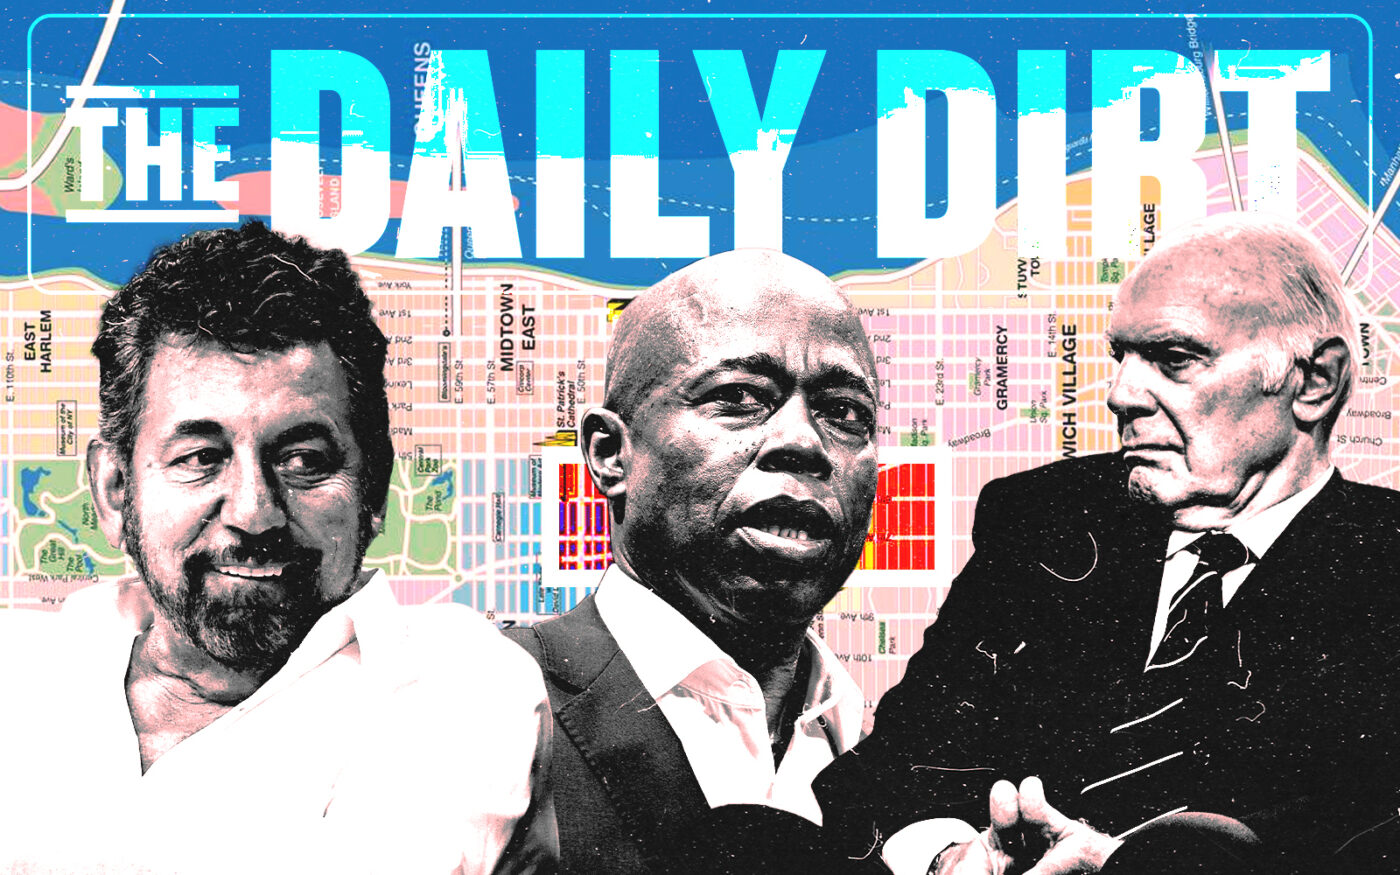 The Daily Dirt: All eyes on Midtown